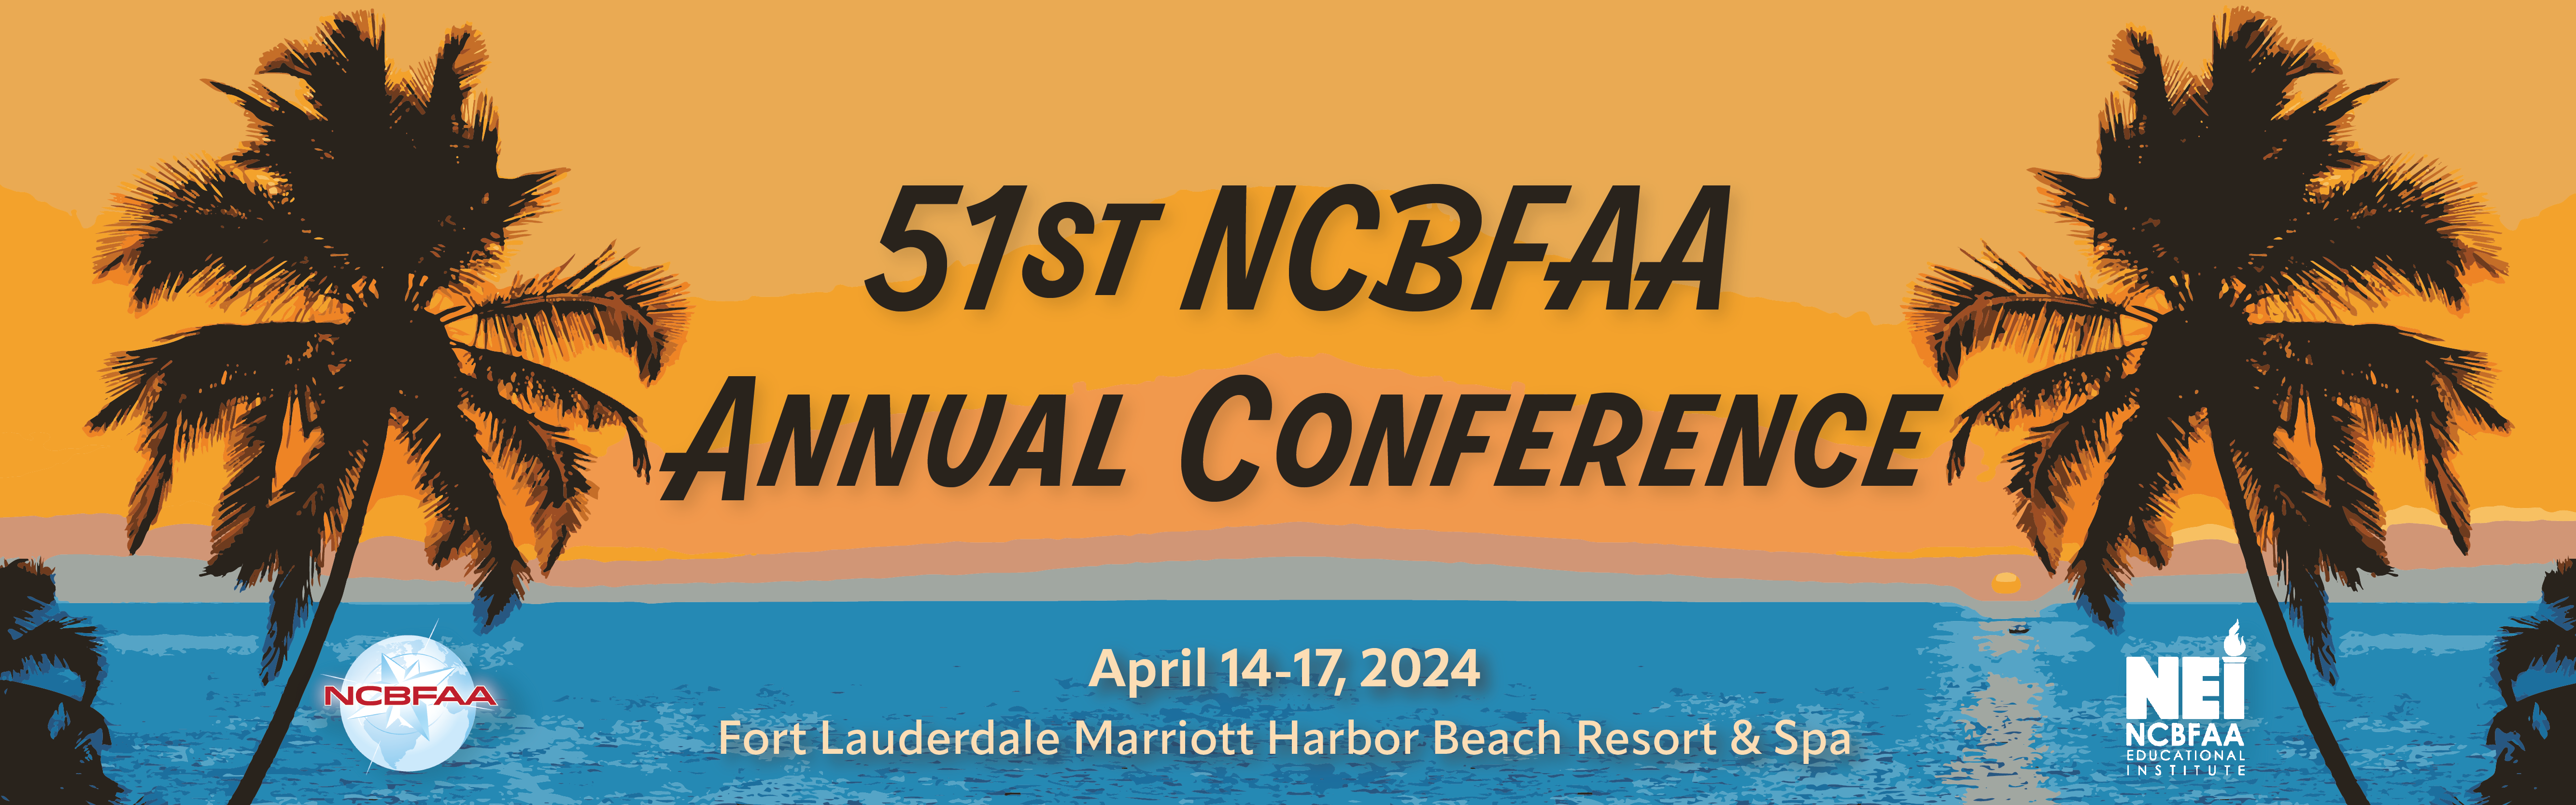 2024 NCBFAA Annual Conference Banner